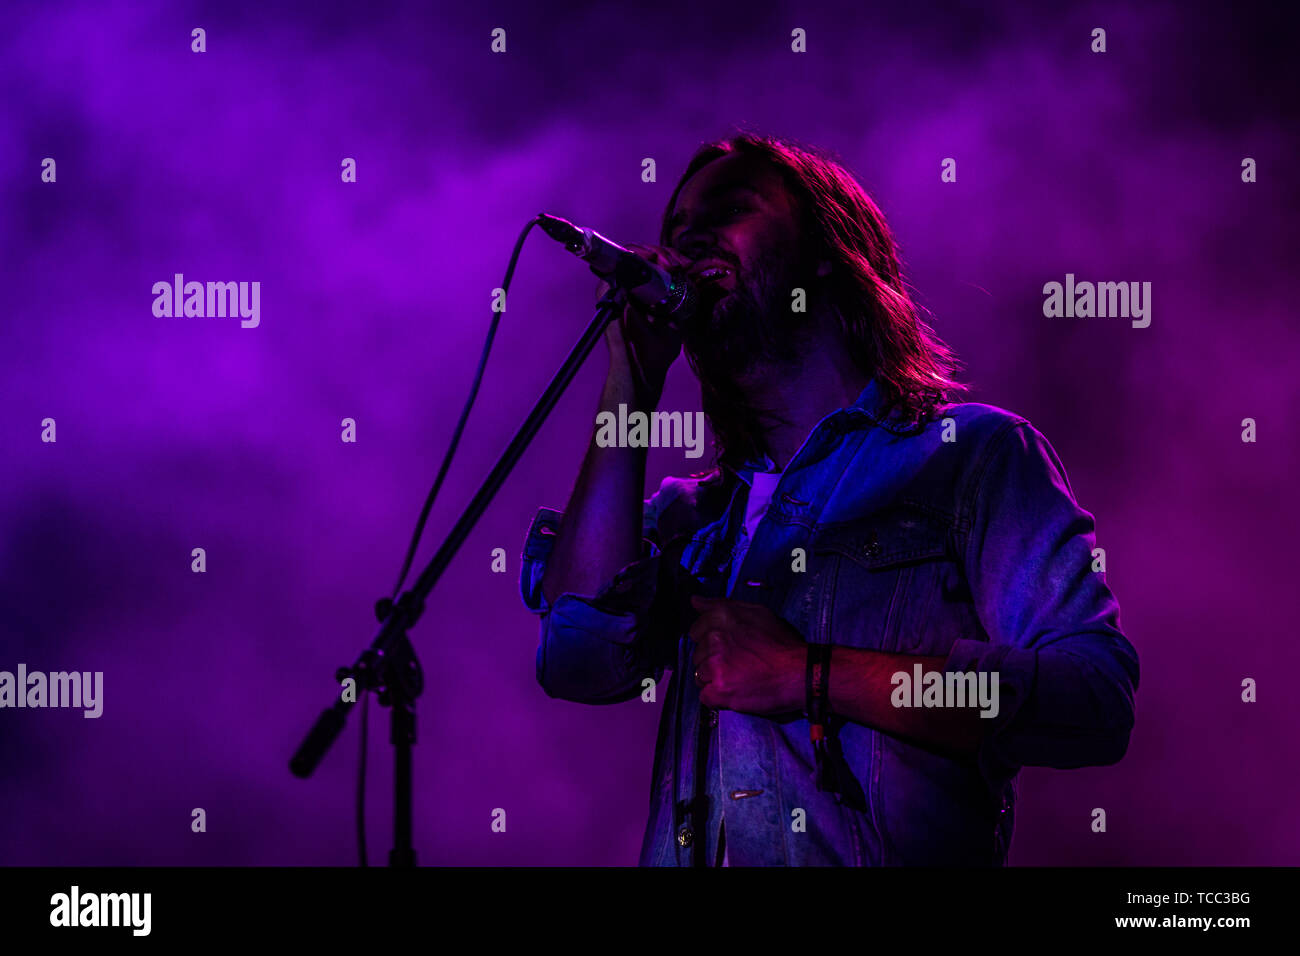 Aarhus, Denmark. 06th June, 2019. Denmark, Aarhus - June 6, 2019. The Australian musical project Tame Impala performs a live concert during the Danish music festival Northside 2019 in Aarhus. Here guitarist and musician Kevin Parker is seen live on stage. (Photo Credit: Gonzales Photo/Alamy Live News Stock Photo